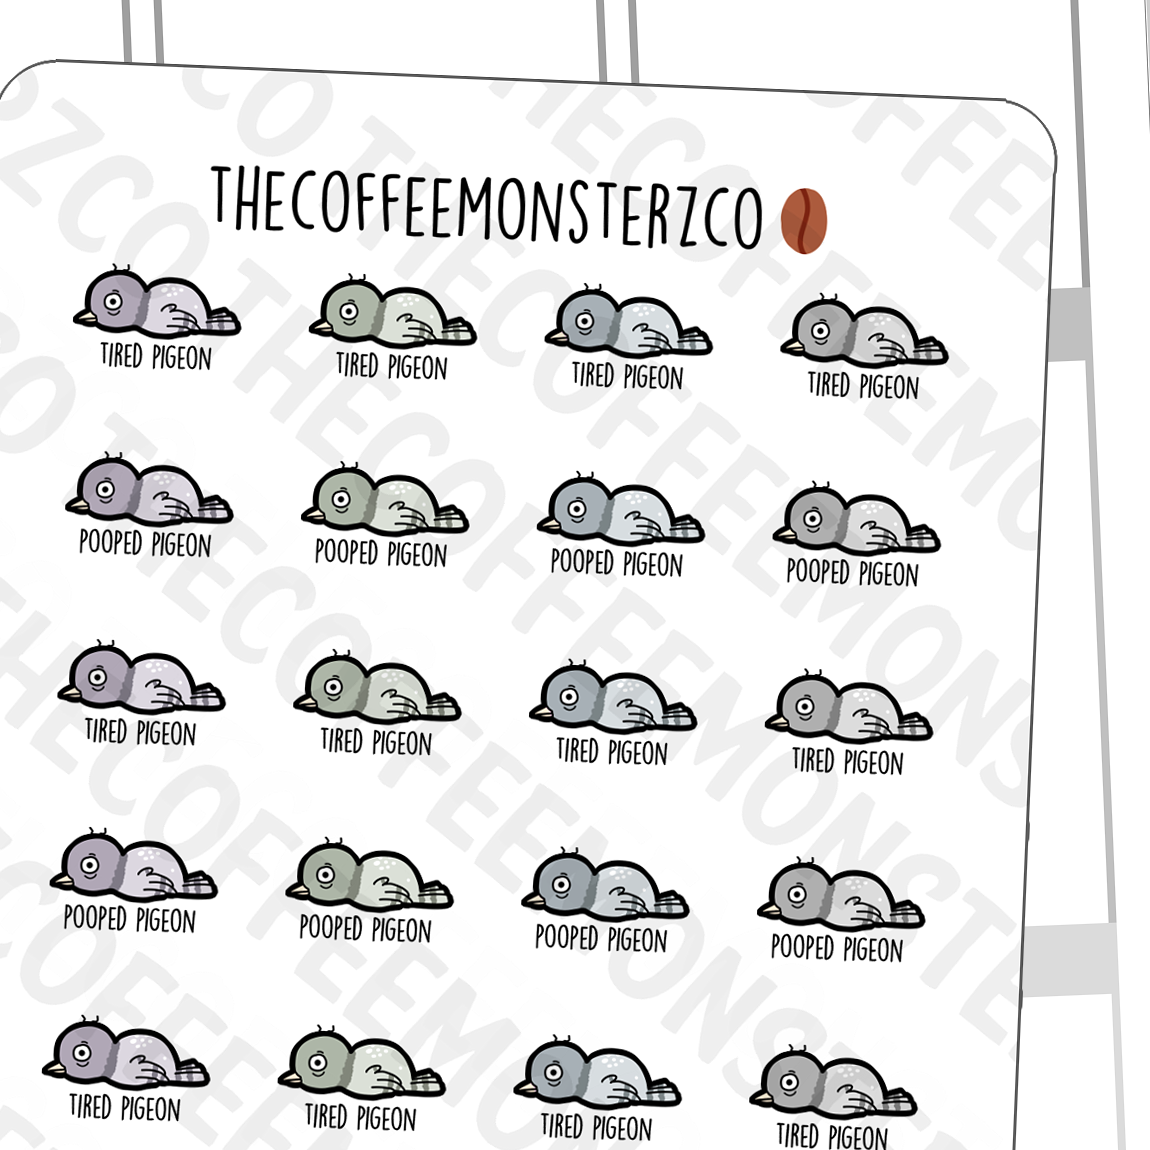 Tired & Pooped Pigeon - TheCoffeeMonsterzCo